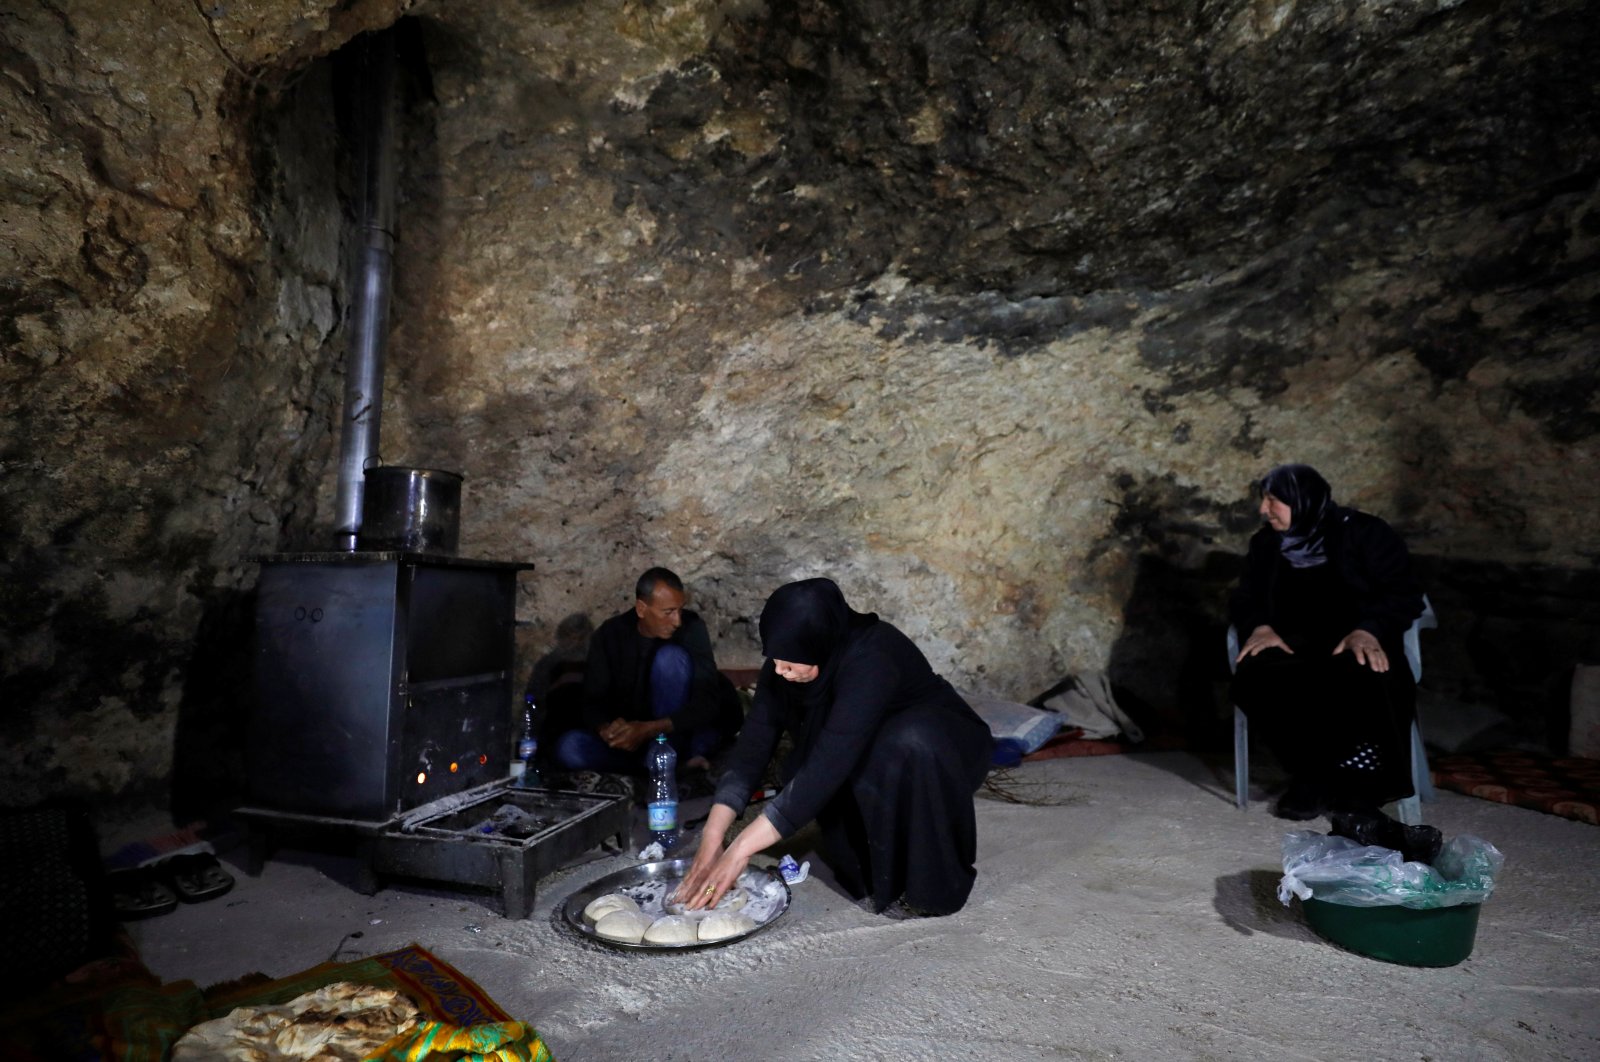 A Palestinian woman prepares dough for bread in a hillside cave, near Hebron, in the Israeli-occupied West Bank, Palestine, Jan. 28, 2021. (Reuters Photo)